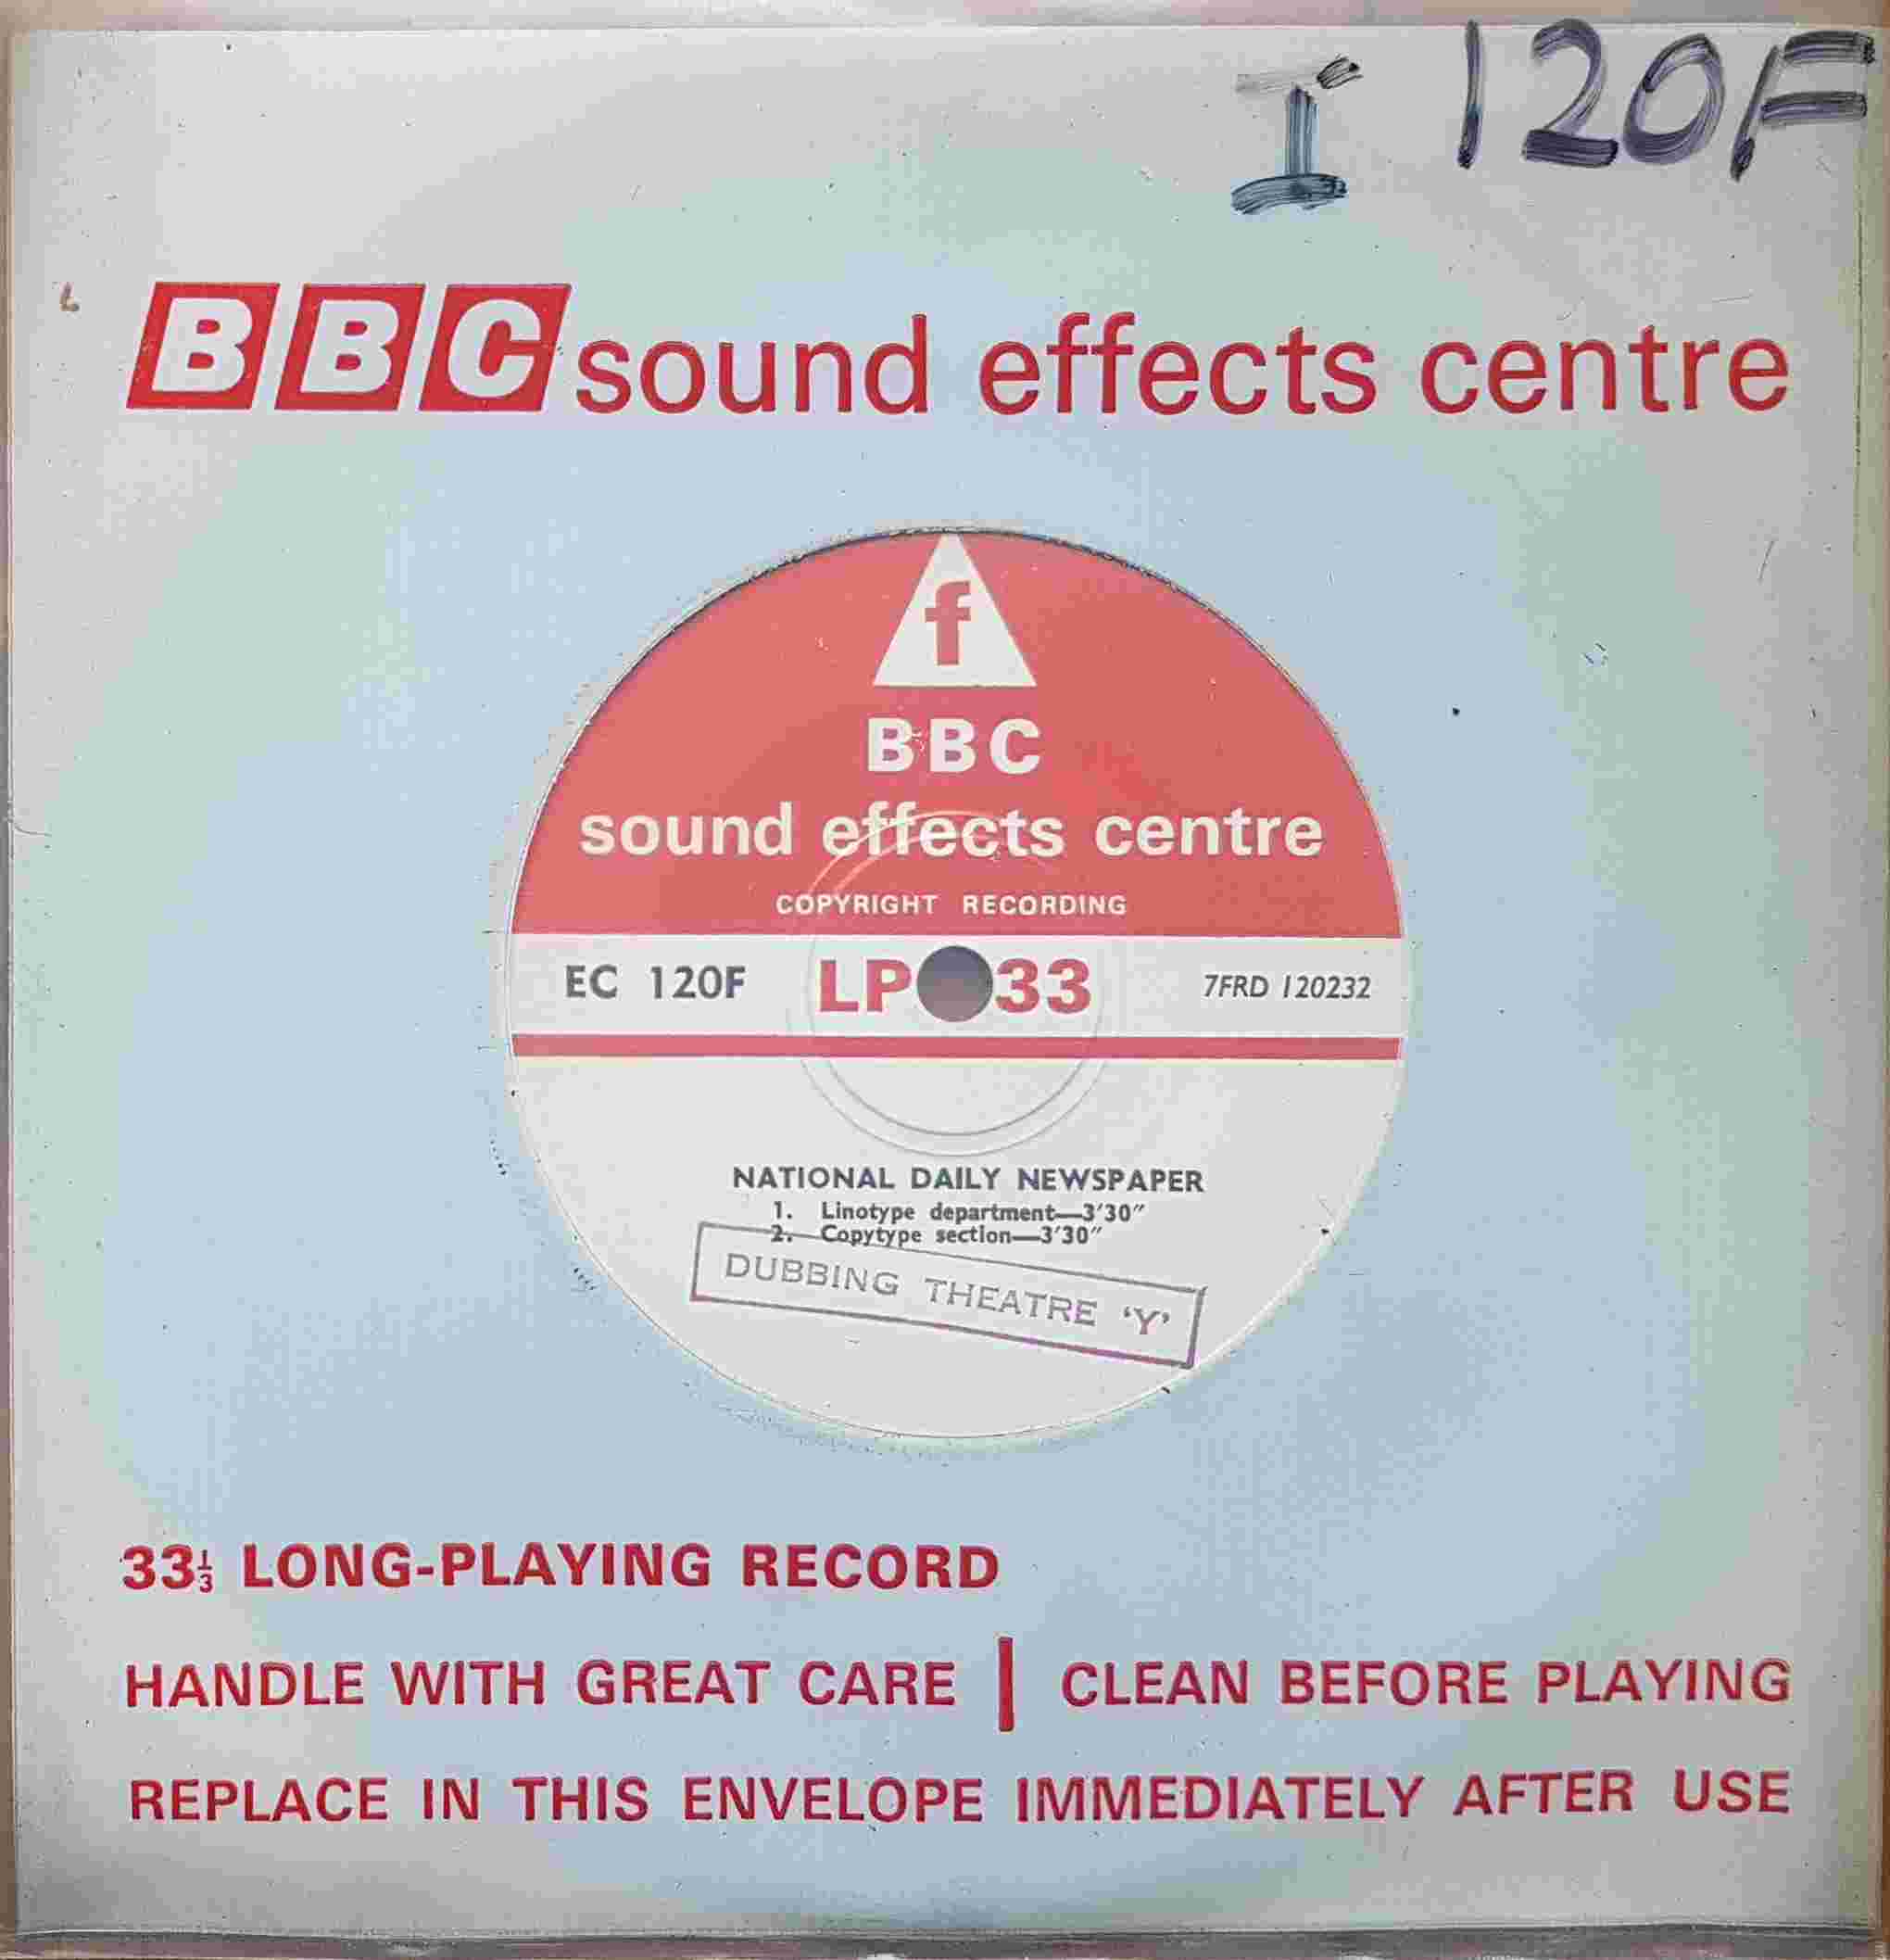 Picture of EC 120F National daily newspaper by artist Not registered from the BBC singles - Records and Tapes library